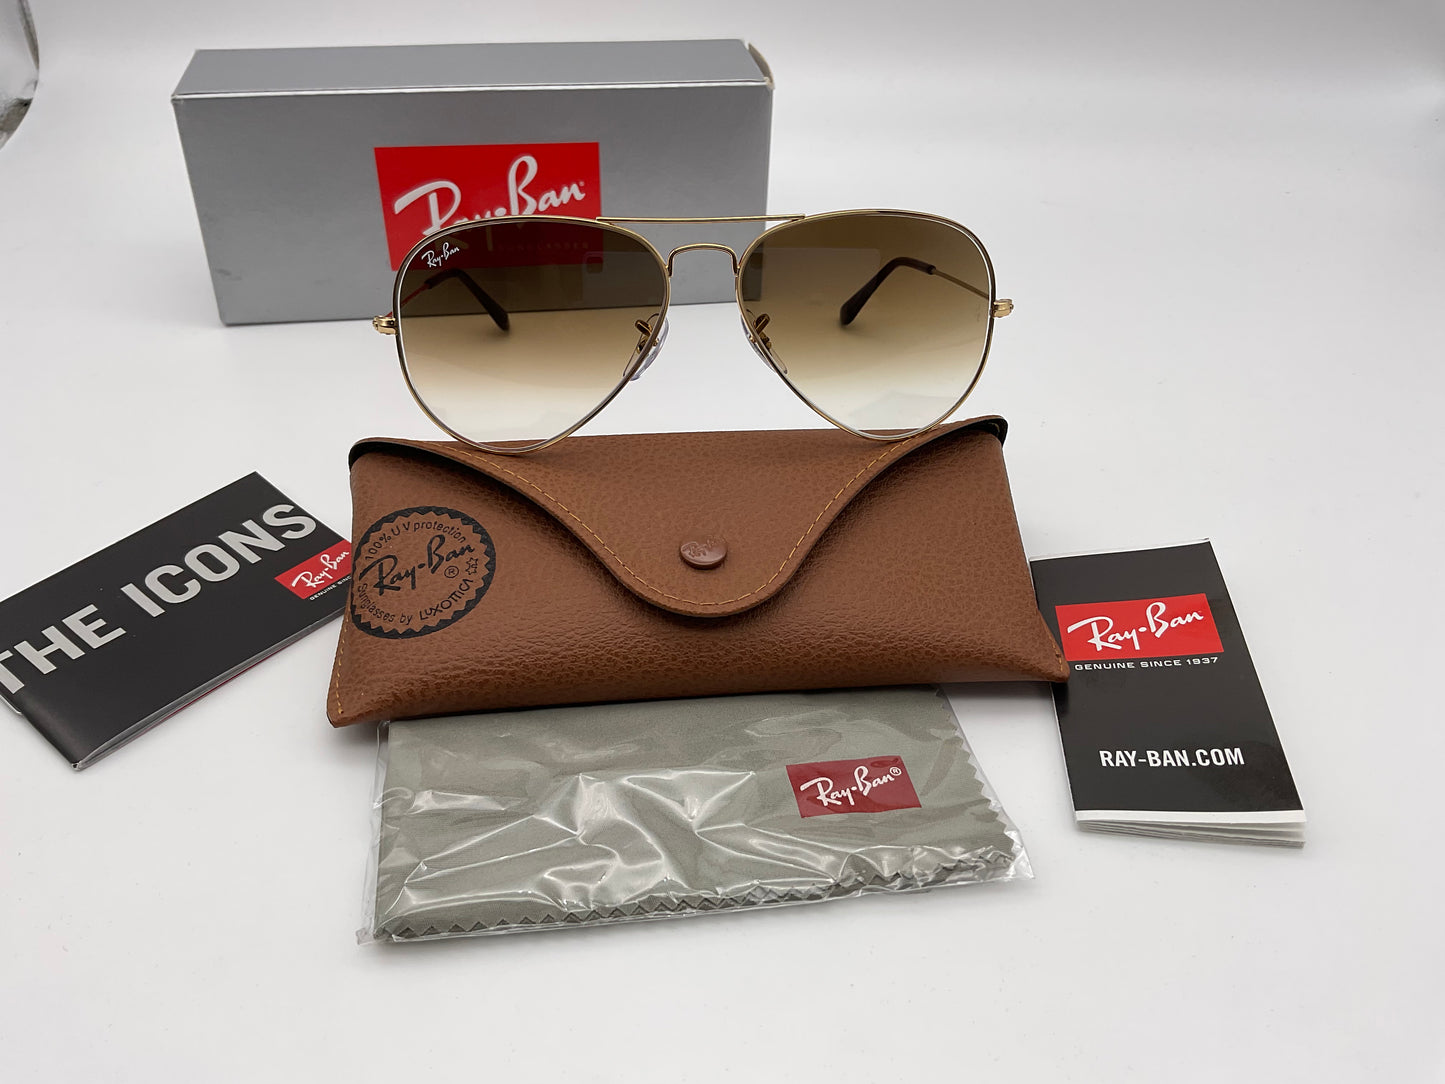 Sunglasses Ray-Ban AVIATOR 58mm RB3025 001/51 Gold Gradient Brown Clear Glass Lenses NEW